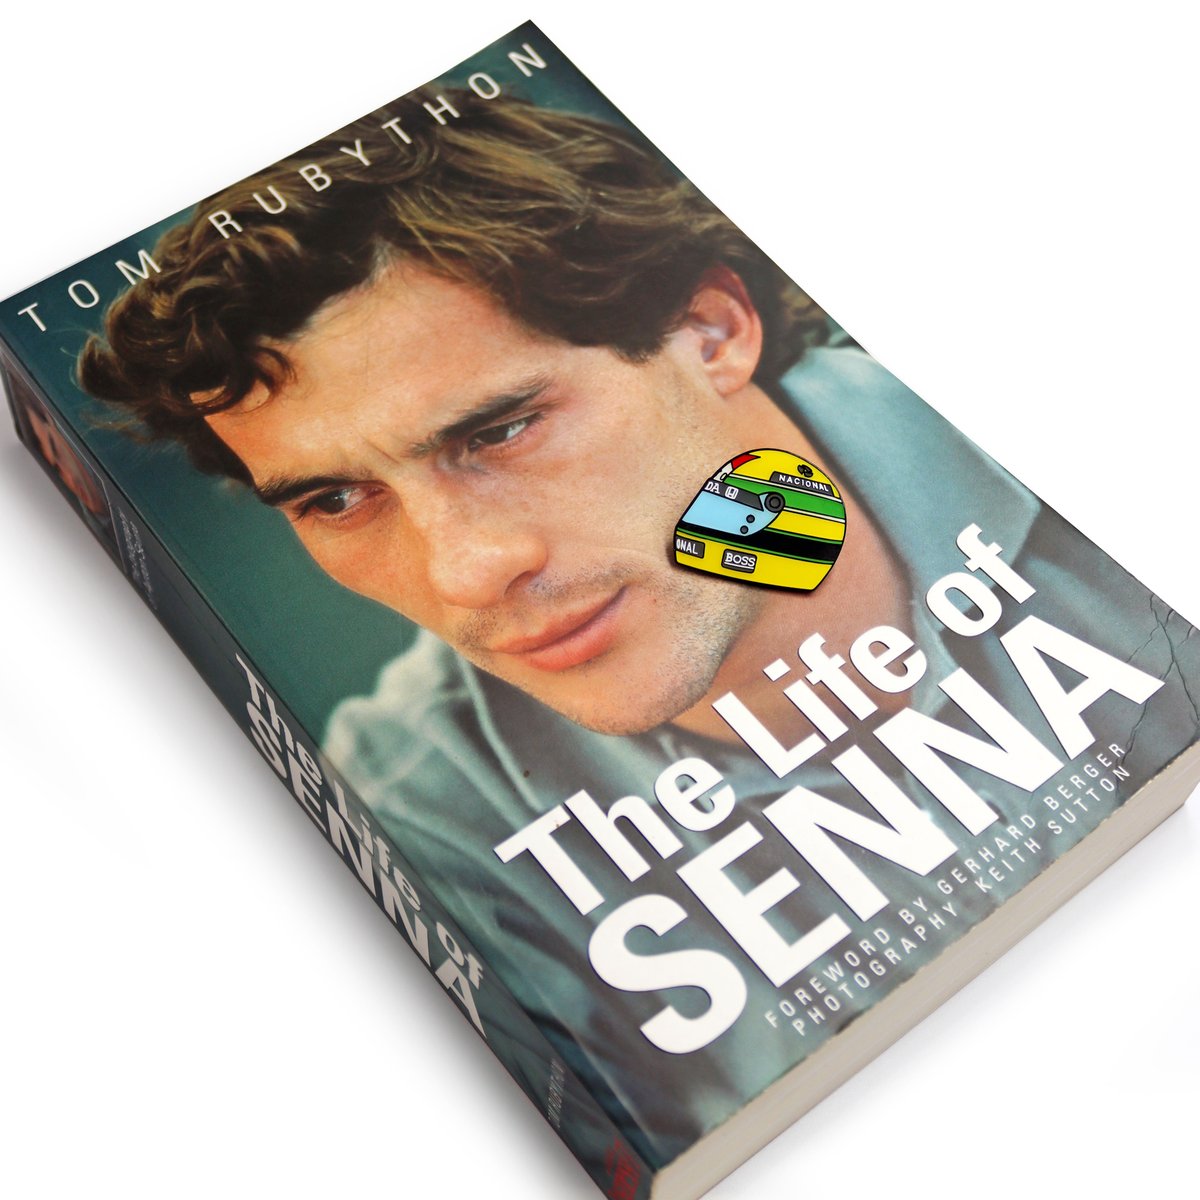 30 years since we lost the legendary F1 driver, Ayrton Senna. This is one of our favourite pin badges that's been made in his honour.